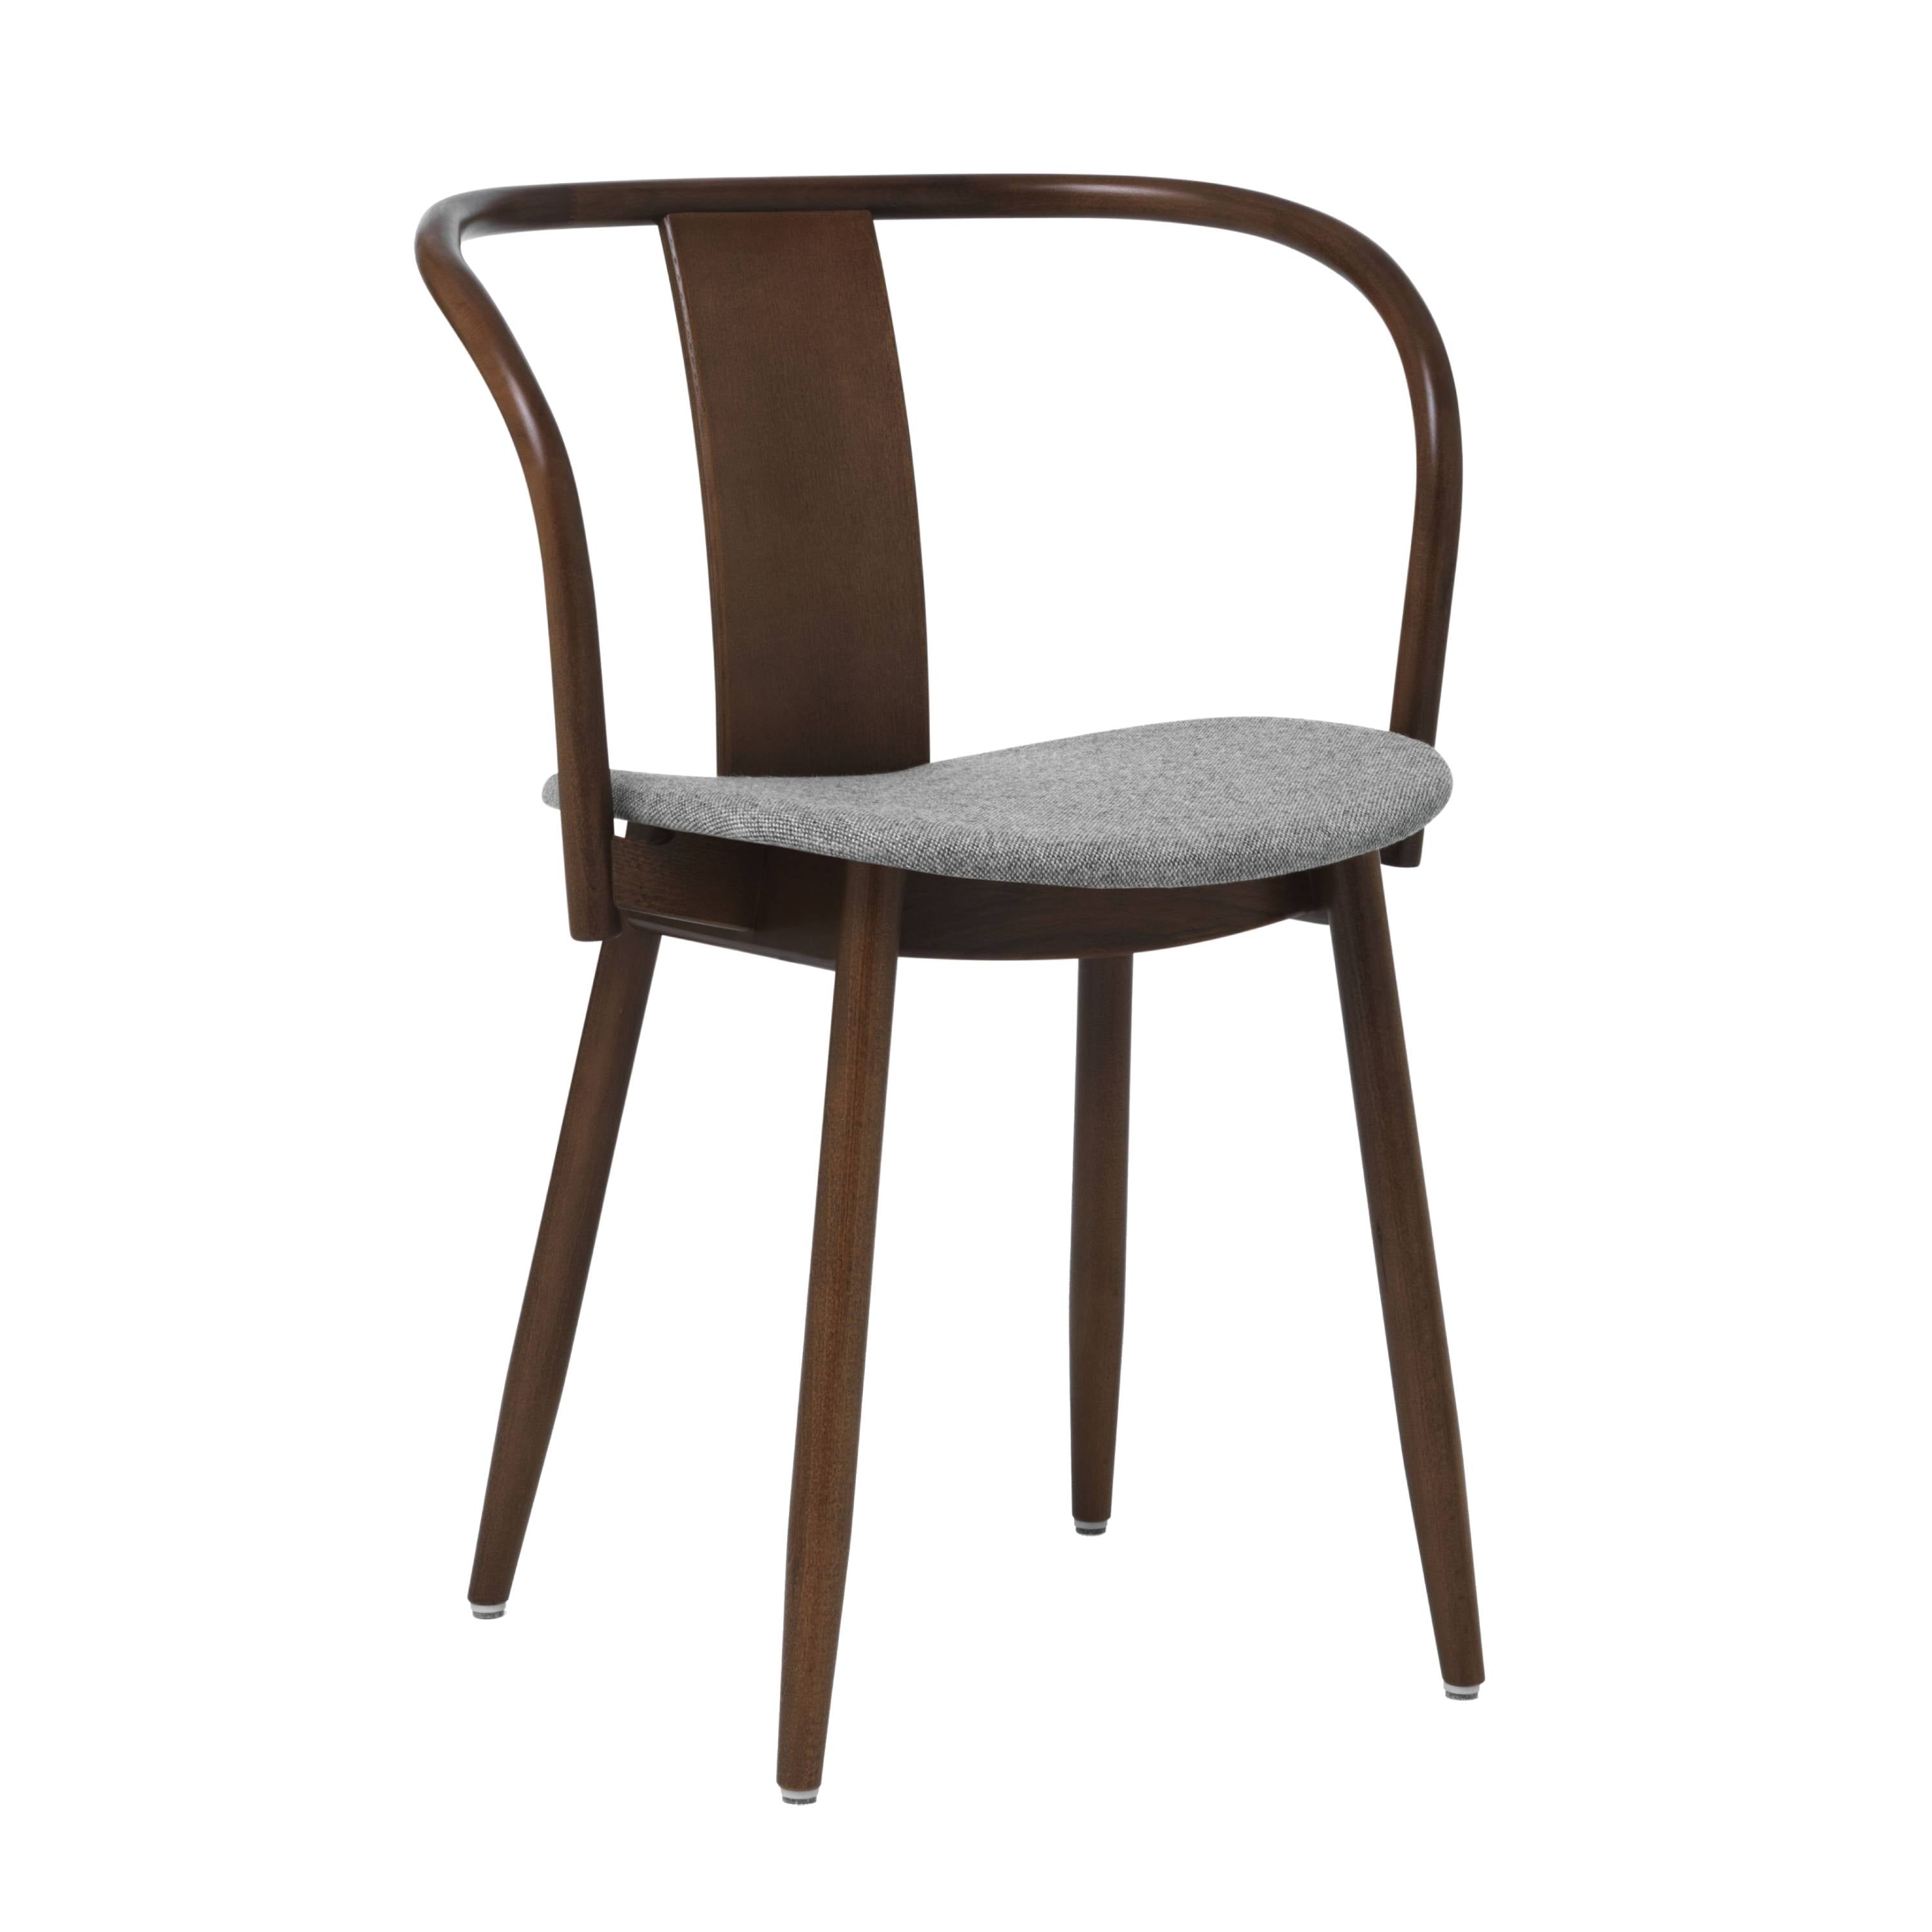 Icha Chair: Upholstered + Walnut Stained Beech